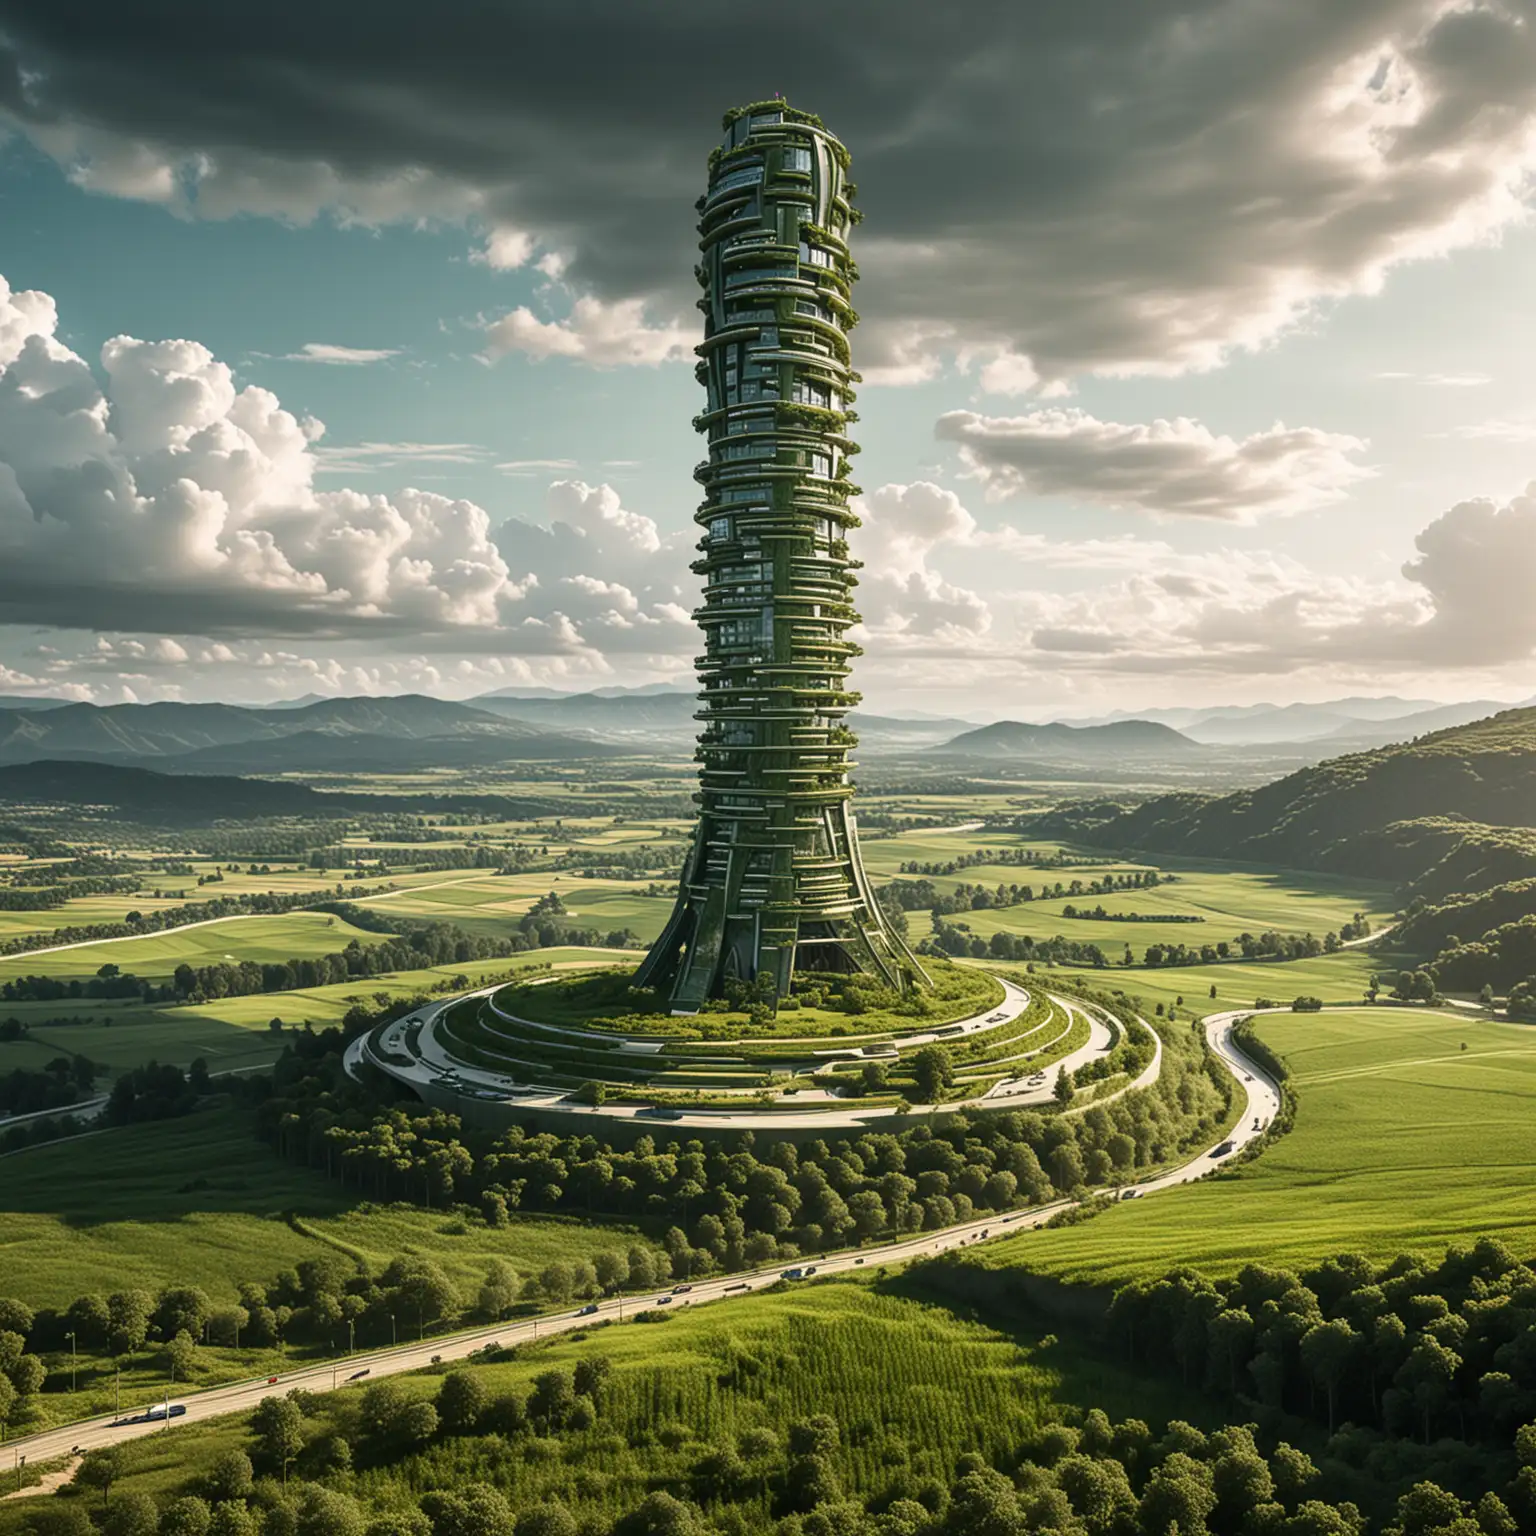 A MASSIVE FUTURISTIC TOWER IN A OPEN FIELD WITH GREEN TERRACES